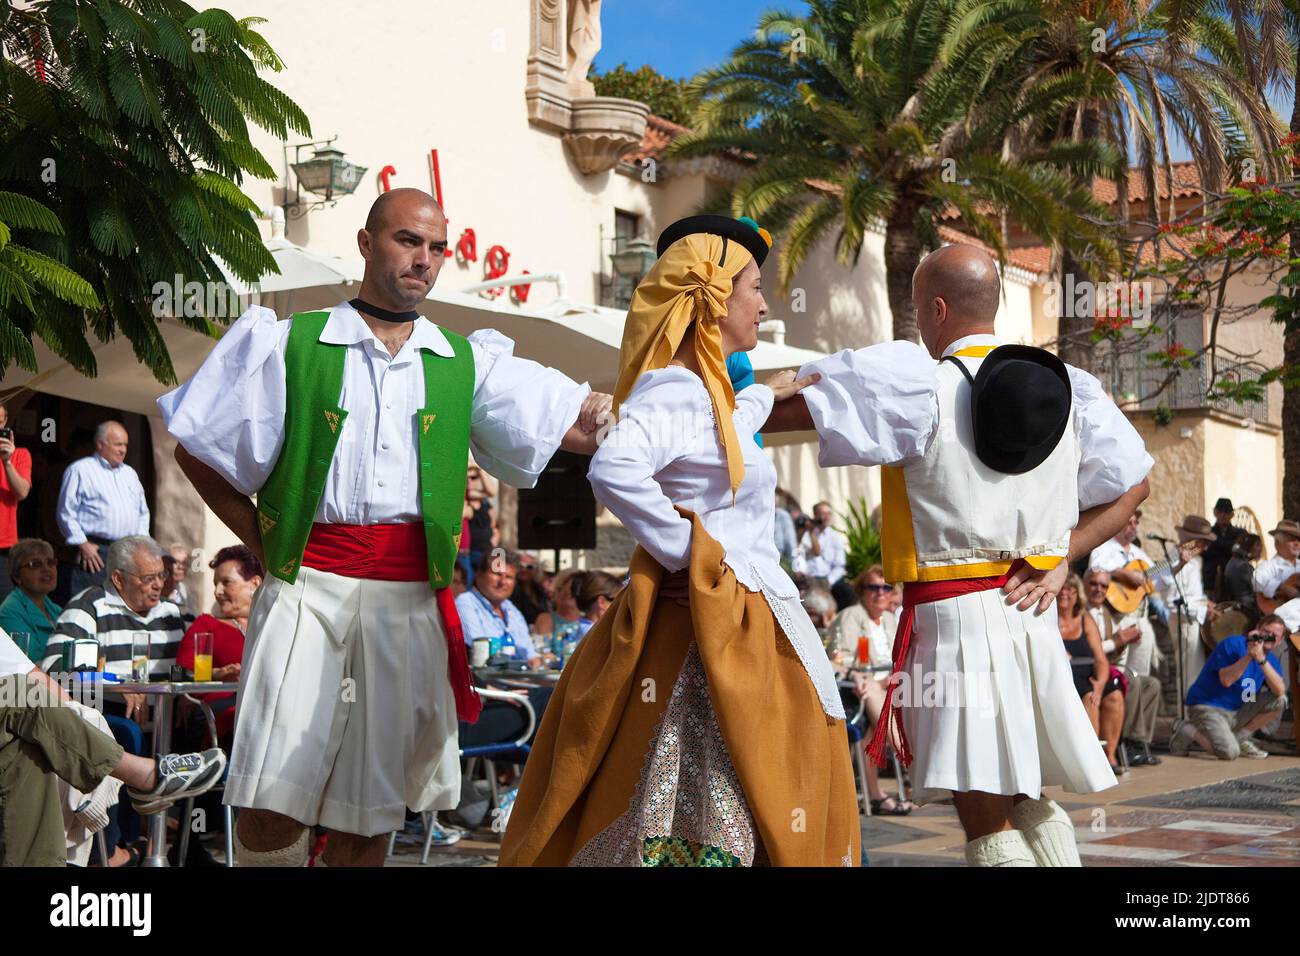 Folklore show at Pueblo Canario, musicians and dancer with traditional costumes at Parque Doramas, Las Palmas, Grand Canary, Canary islands, Spain Stock Photo